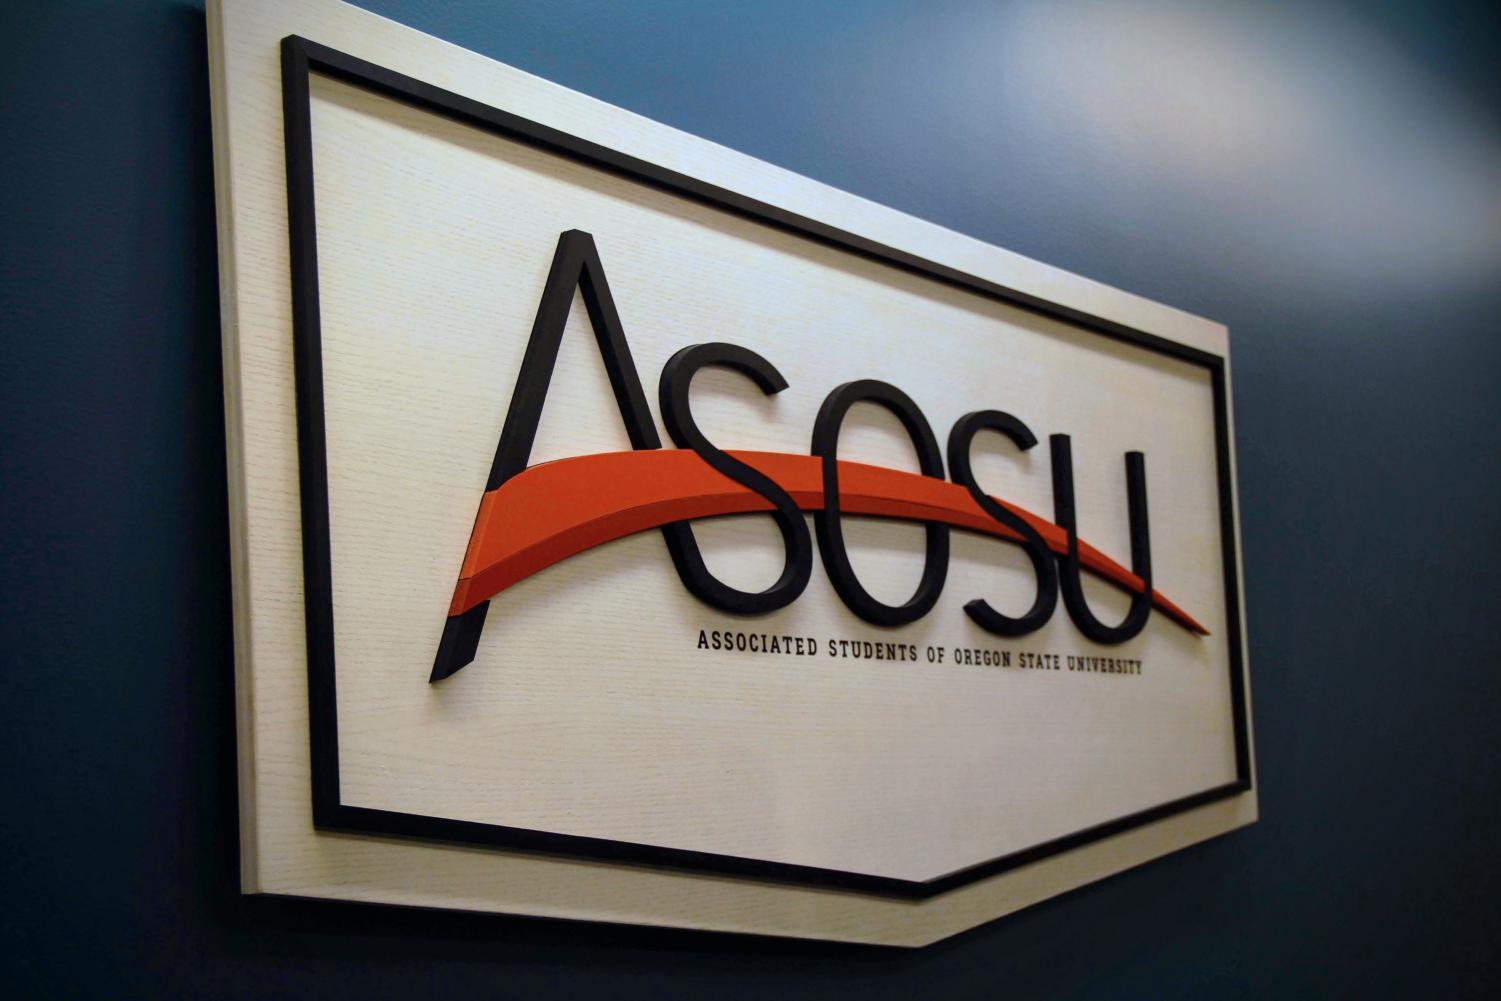 The Associated Students of Oregon State University sign hangs in the ASOSU office.